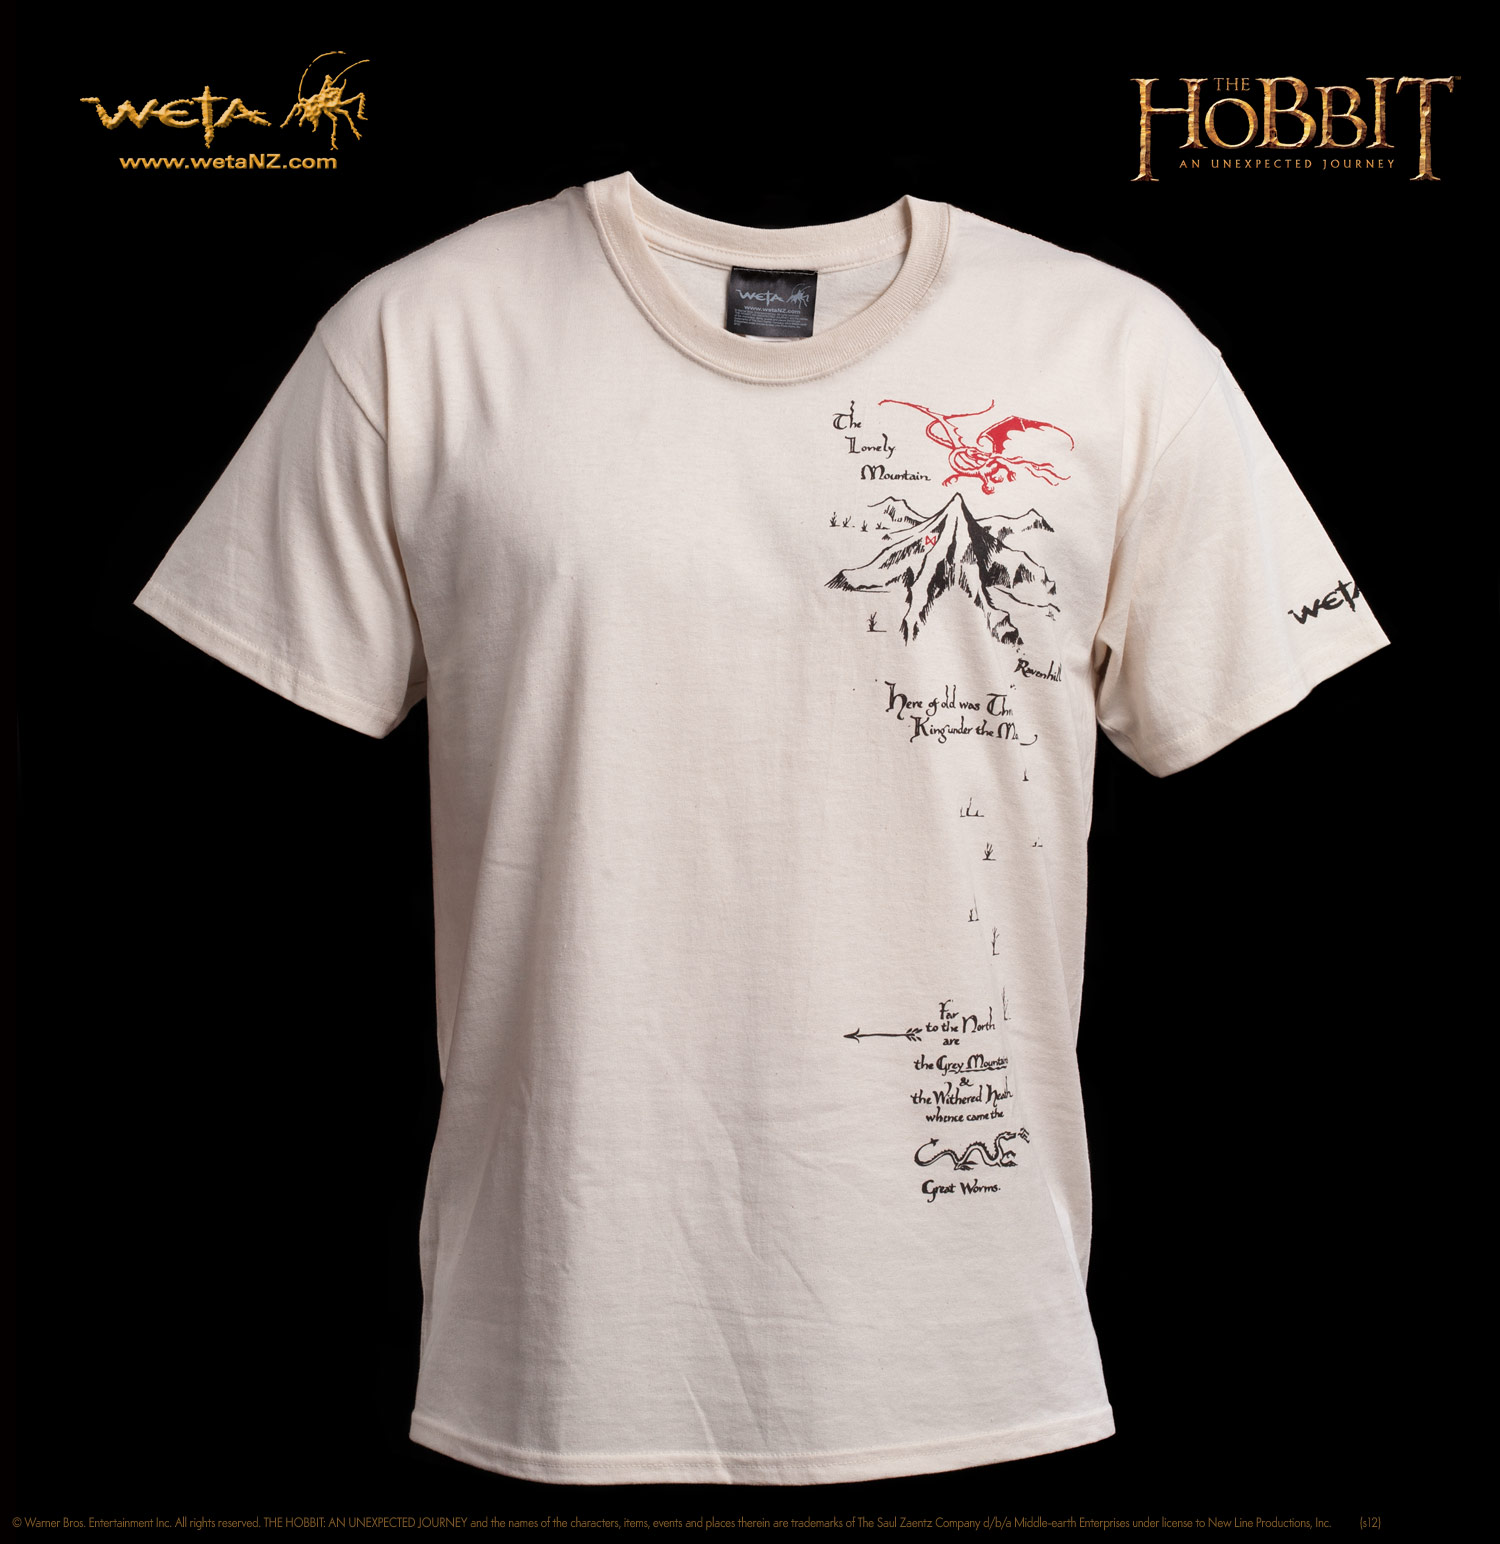 Weta Releases Two ‘Hobbit’ Shirts